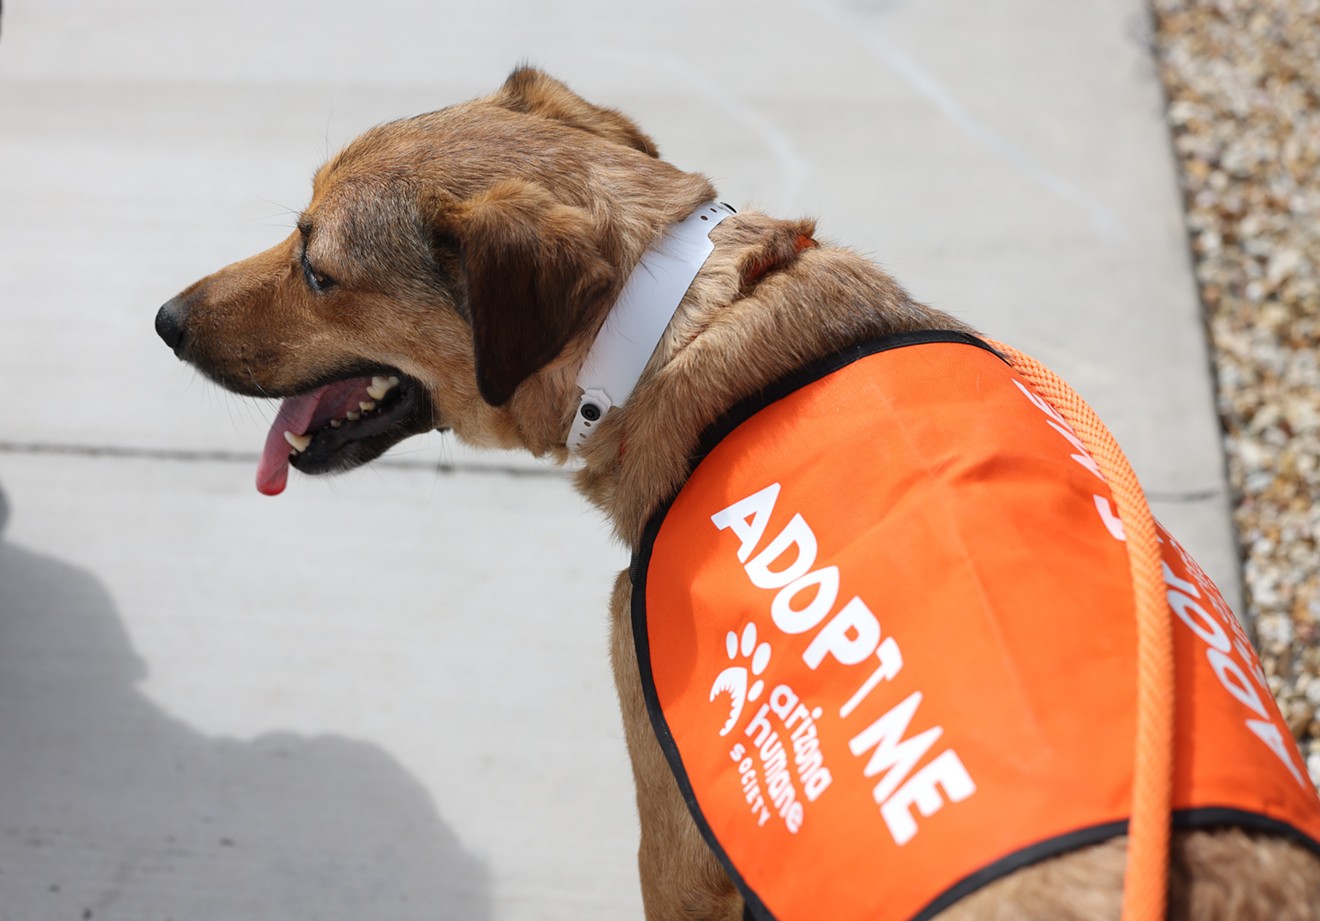 Tiffany models the “Adopt Me” vest that dogs out on field trips wear to help them gain more exposure.